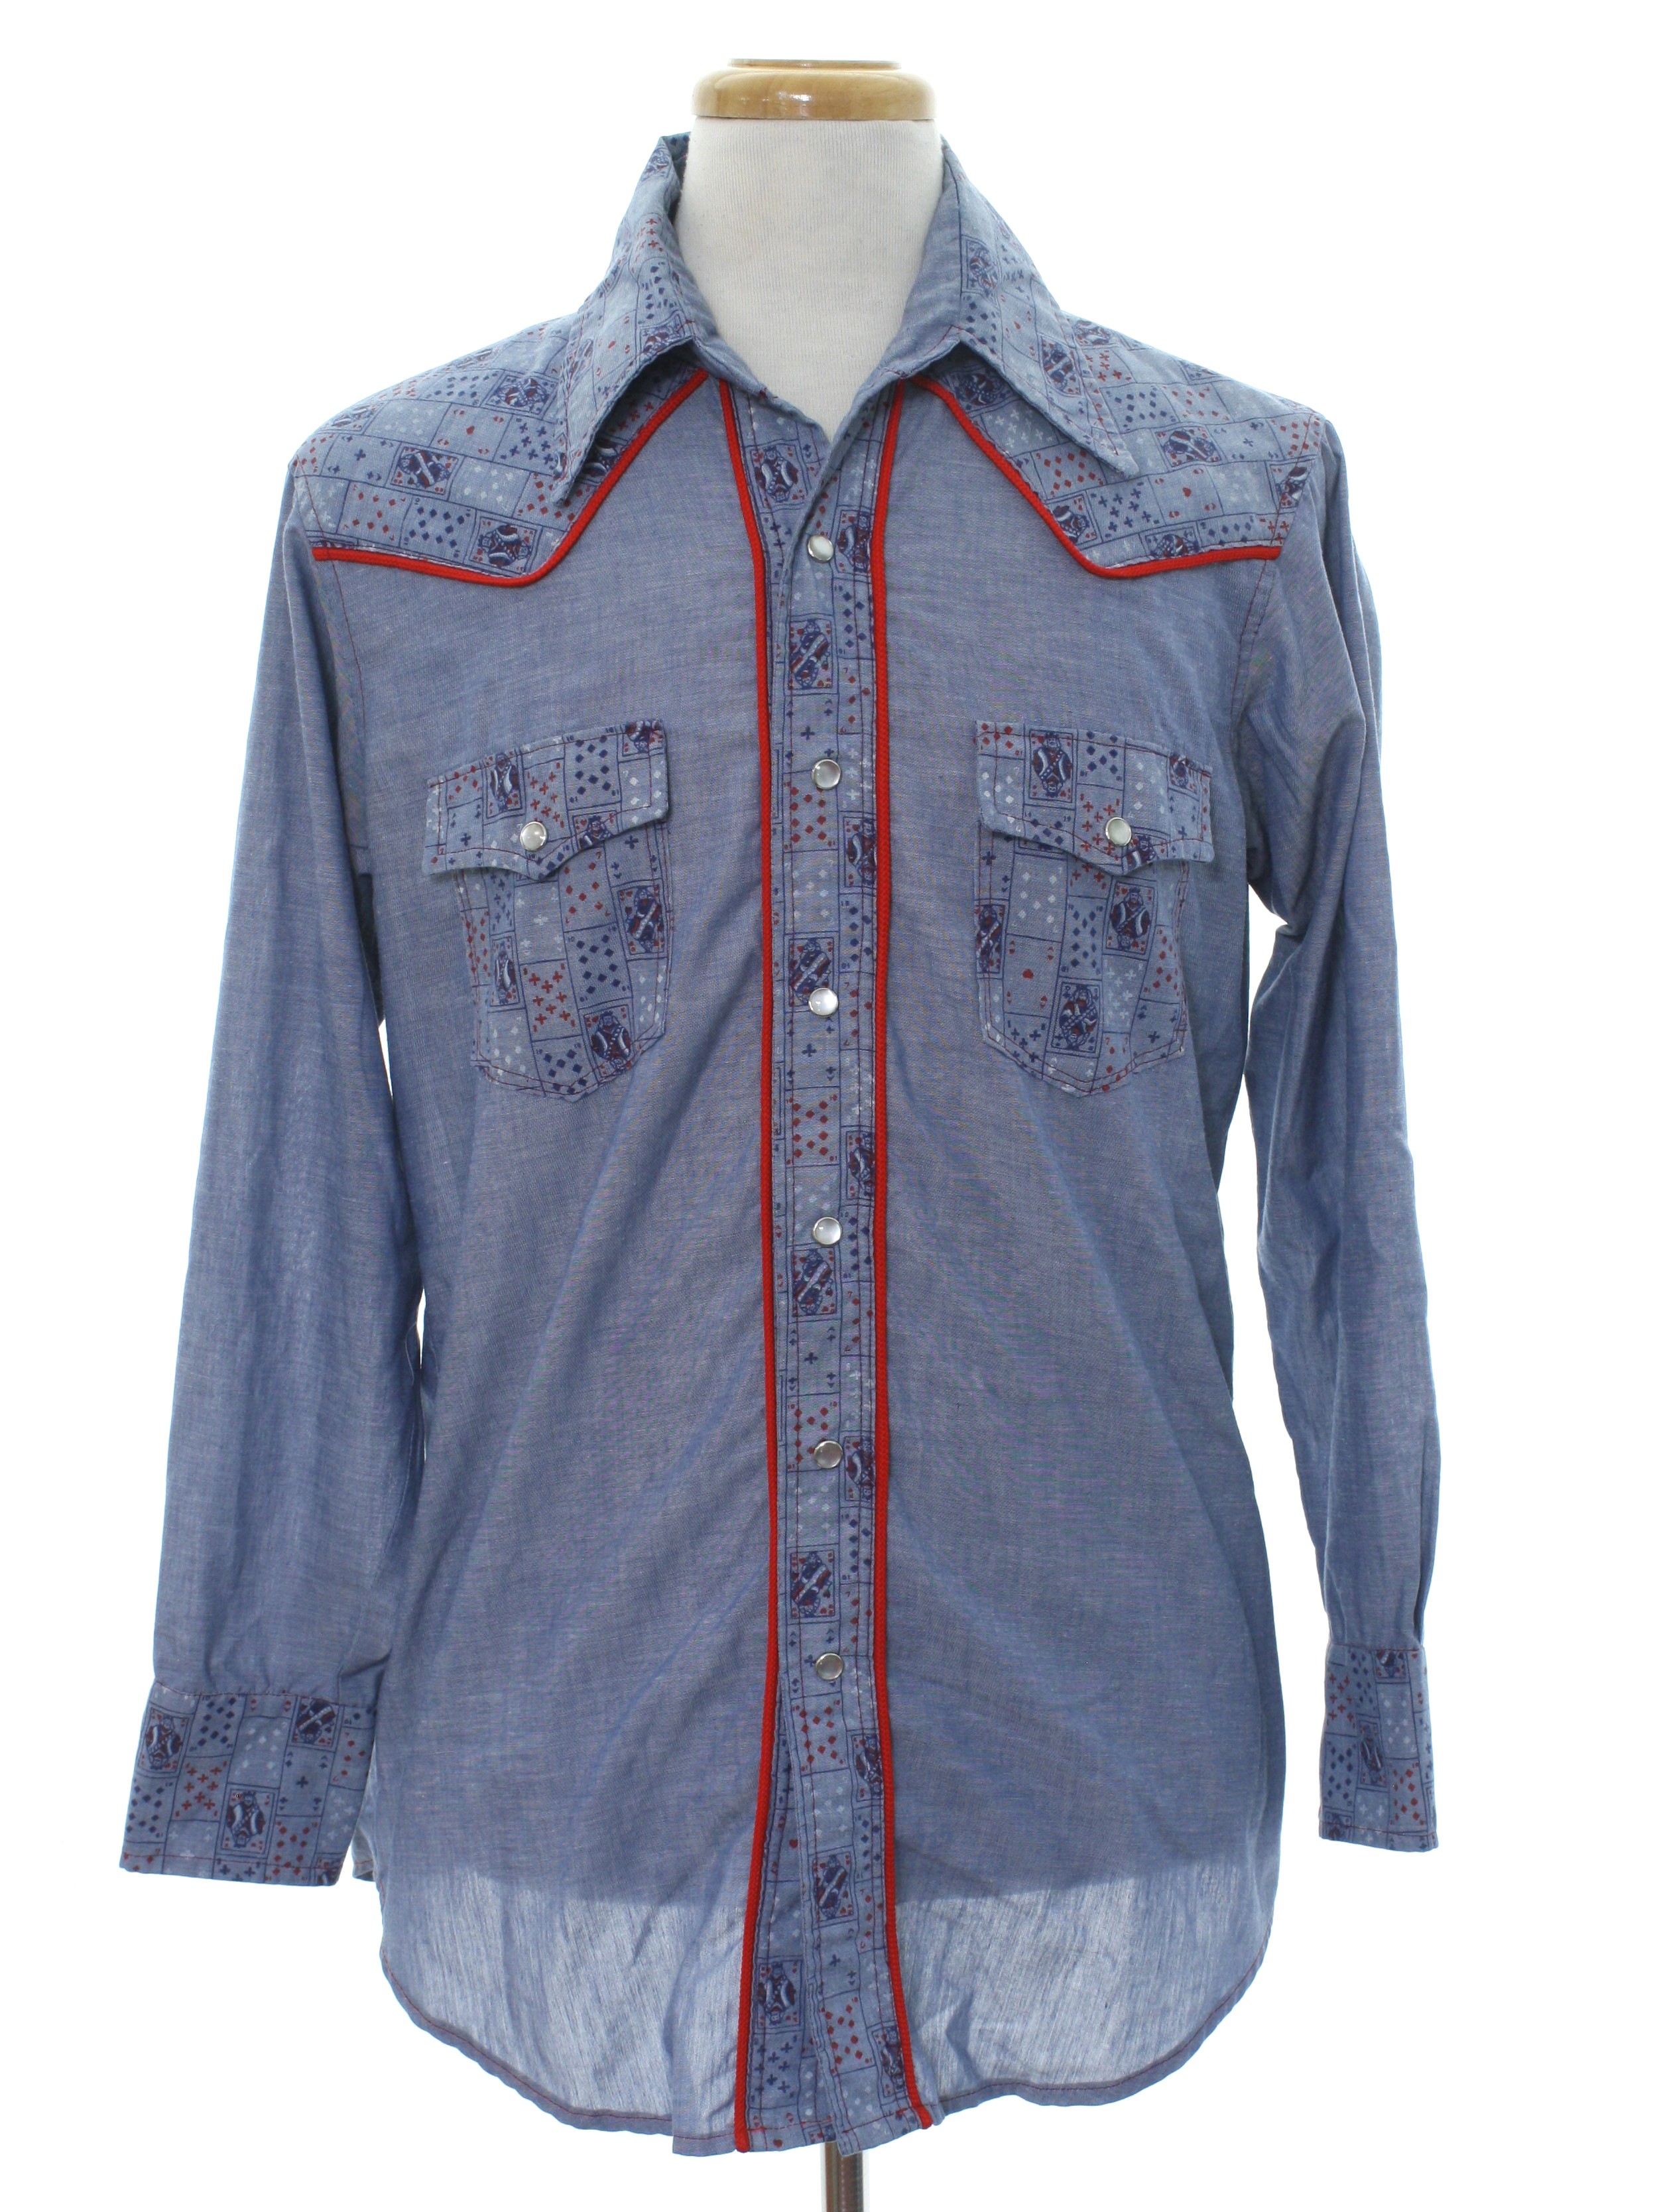 70's Vintage Western Shirt: Late 70s or Early 80s -Home Sewn- Mens ...